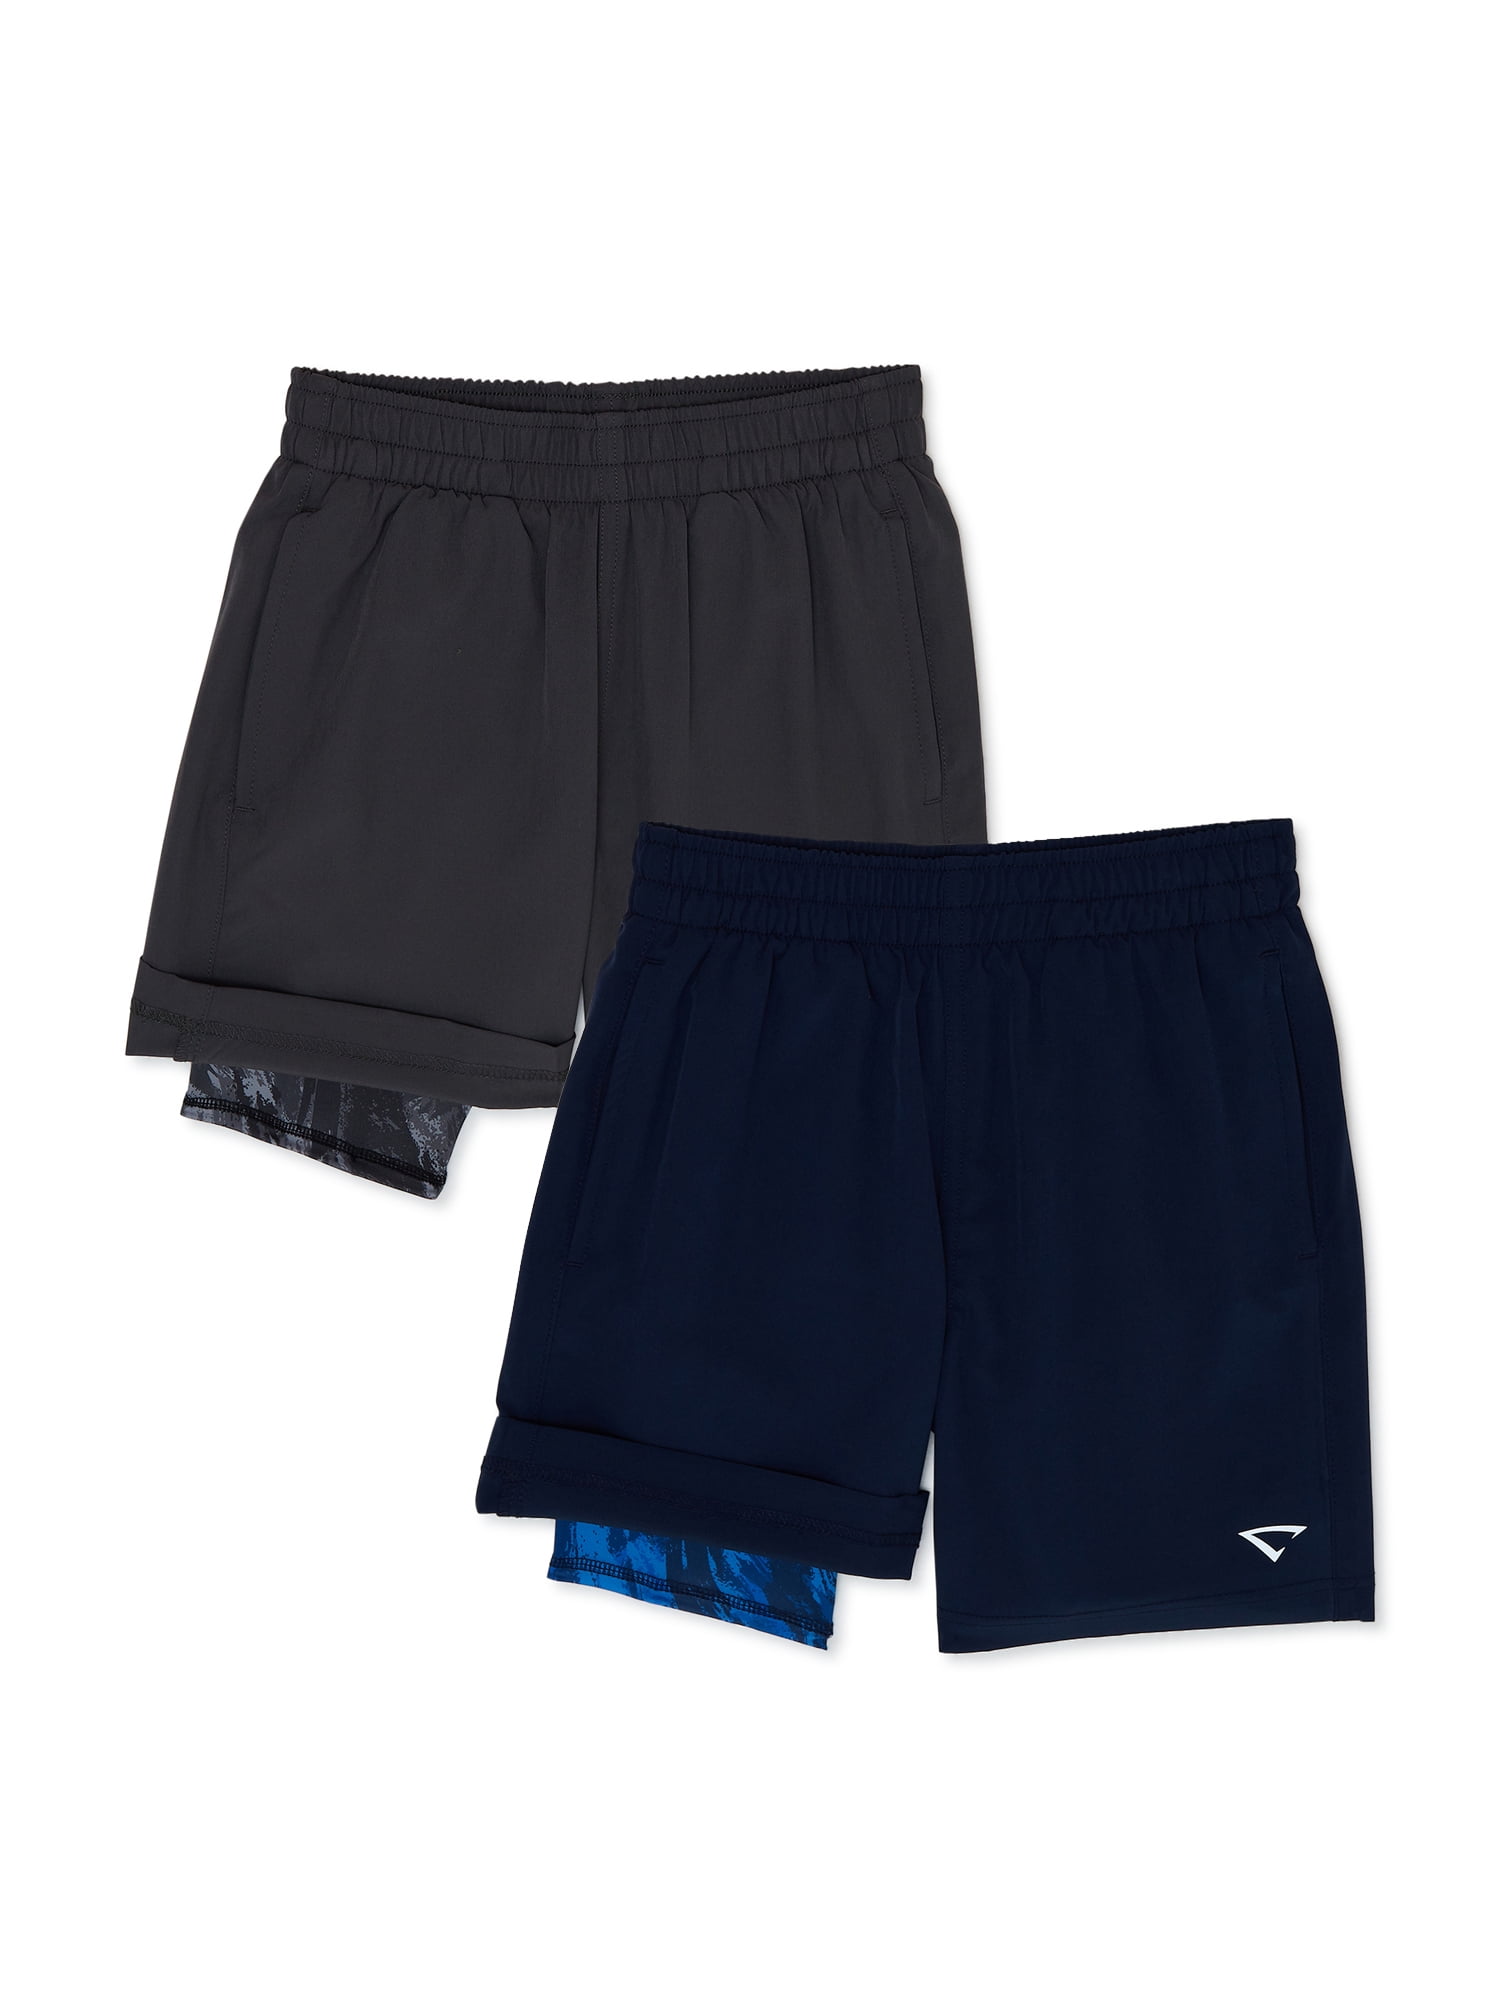 Cheetah Boys’ Woven Shorts with Compression Liners, 2-Pack, Sizes 4-18 &  Husky